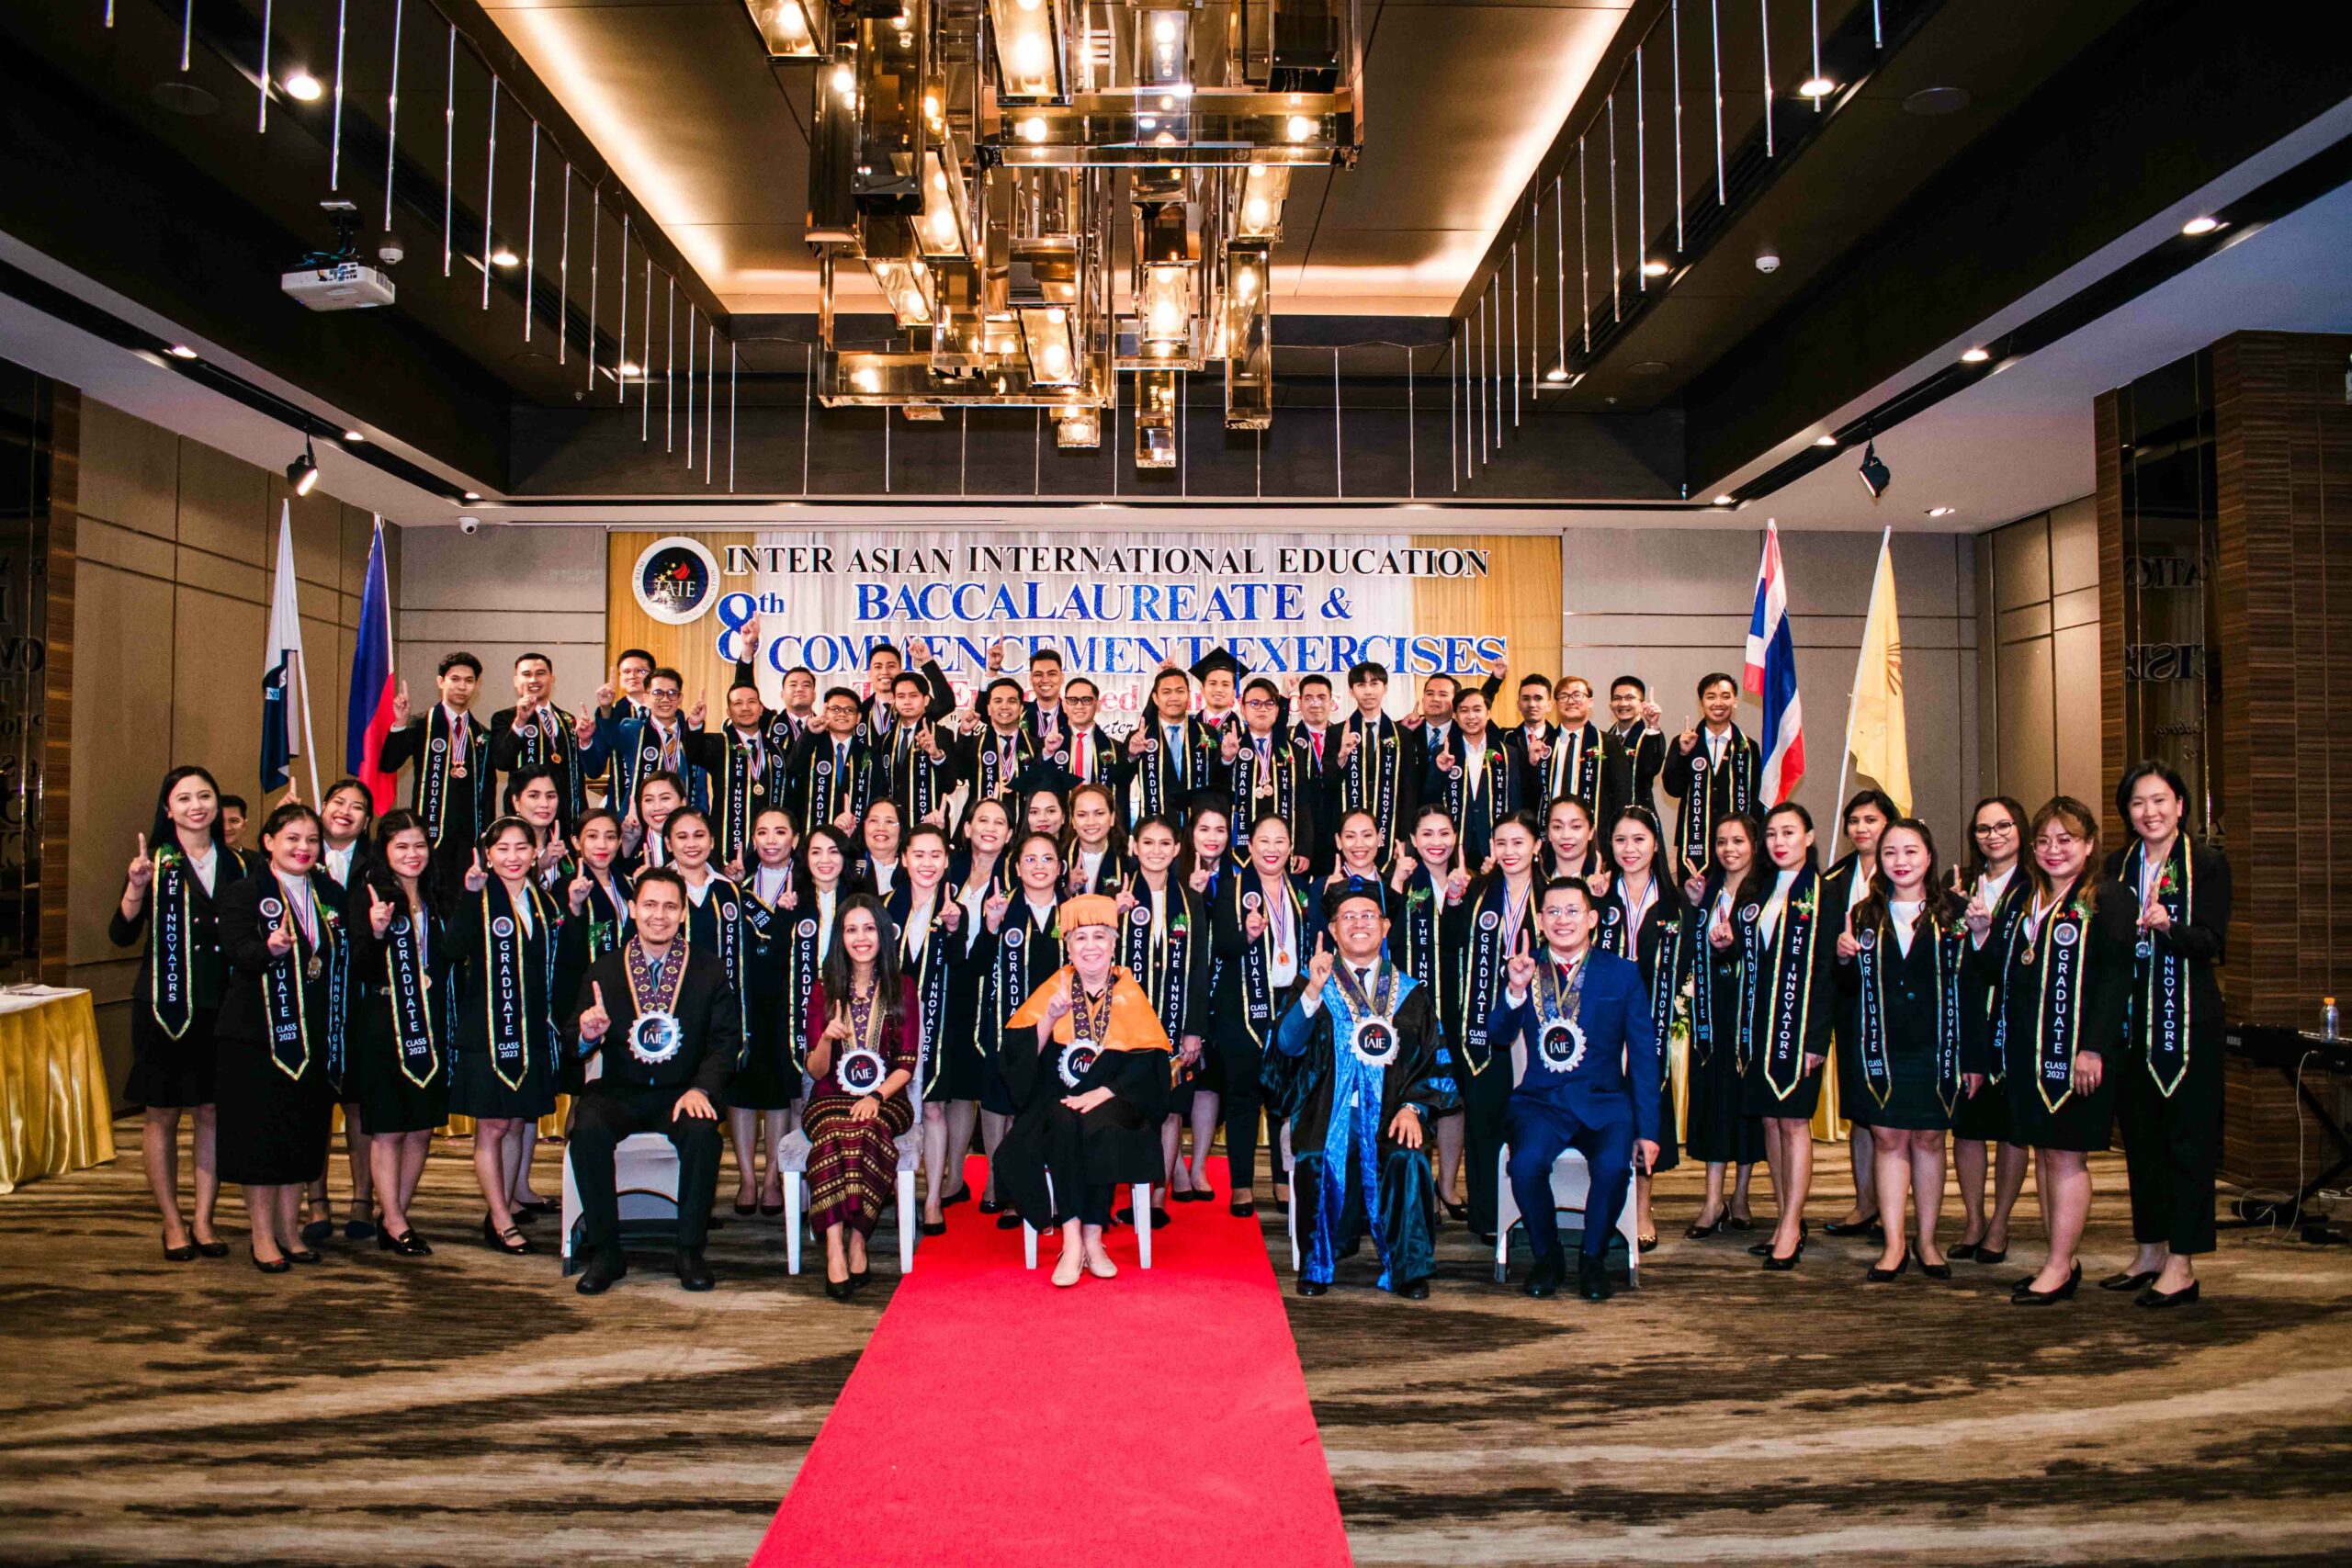 IAIE Commencement Exercises